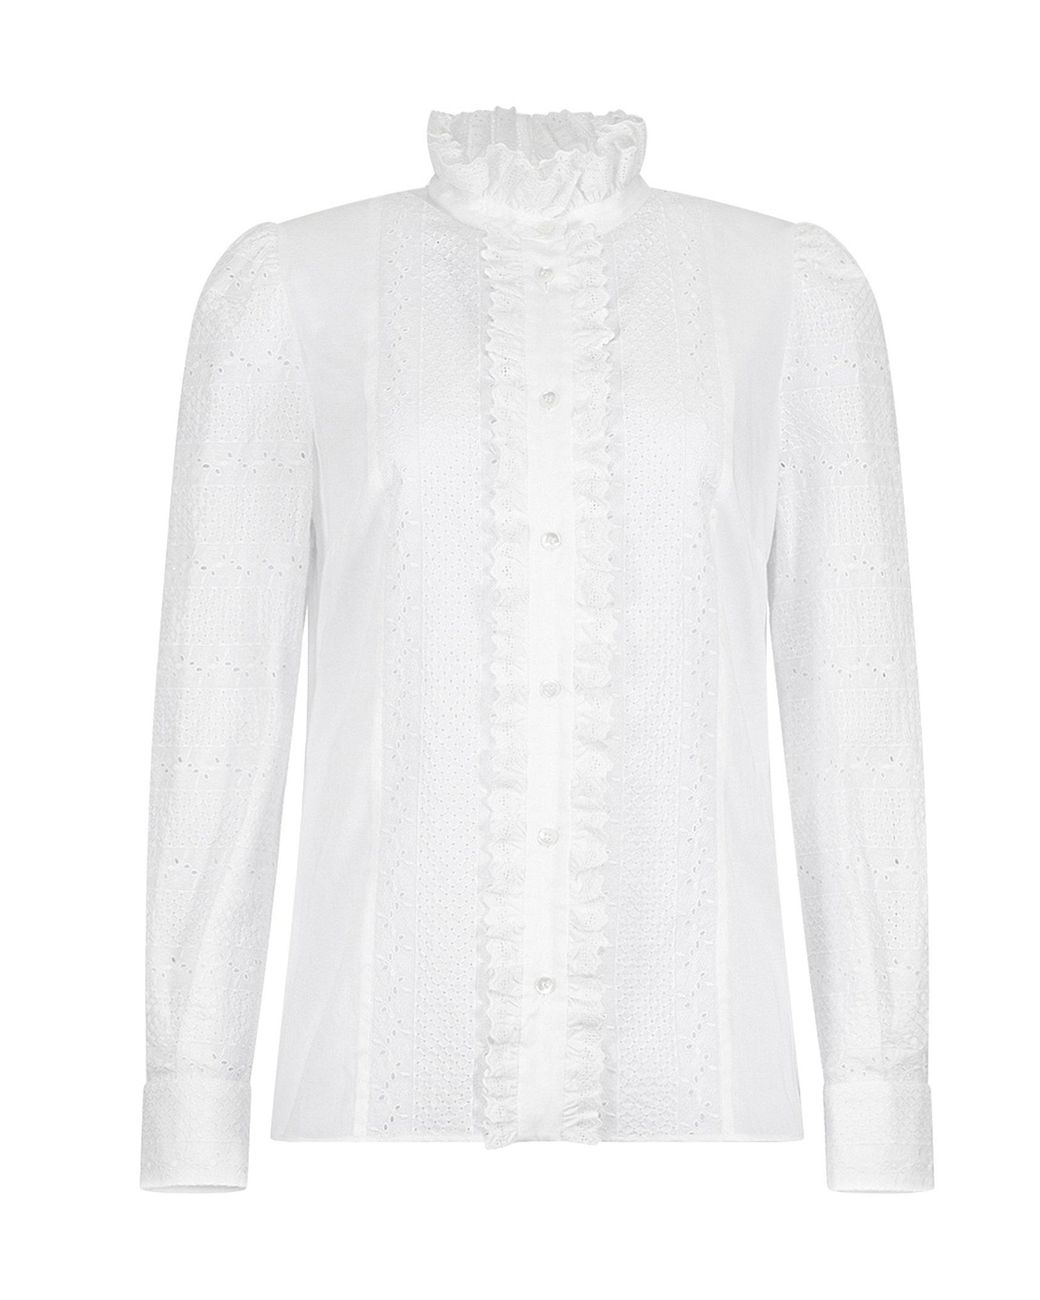 Dolce & Gabbana Cotton Broderie Anglaise Shirt in White - Lyst